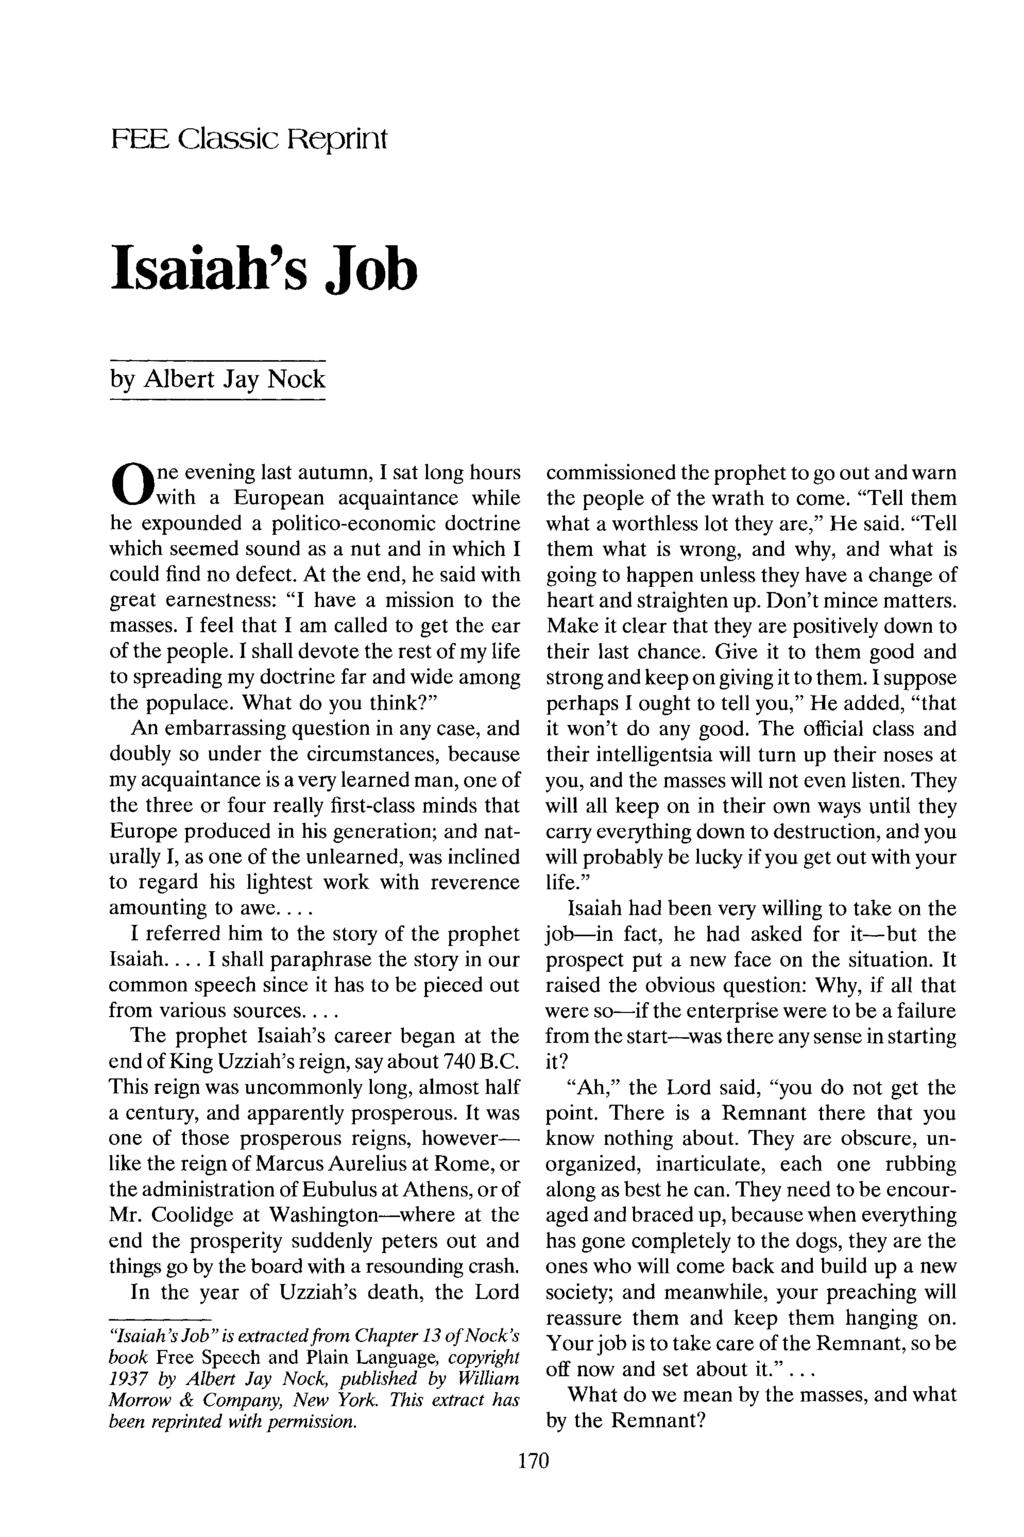 FEE Classic Reprint Isaiah's Job by Albert Jay Nock One evening last autumn, I sat long hours with a European acquaintance while he expounded a politico-economic doctrine which seemed sound as a nut